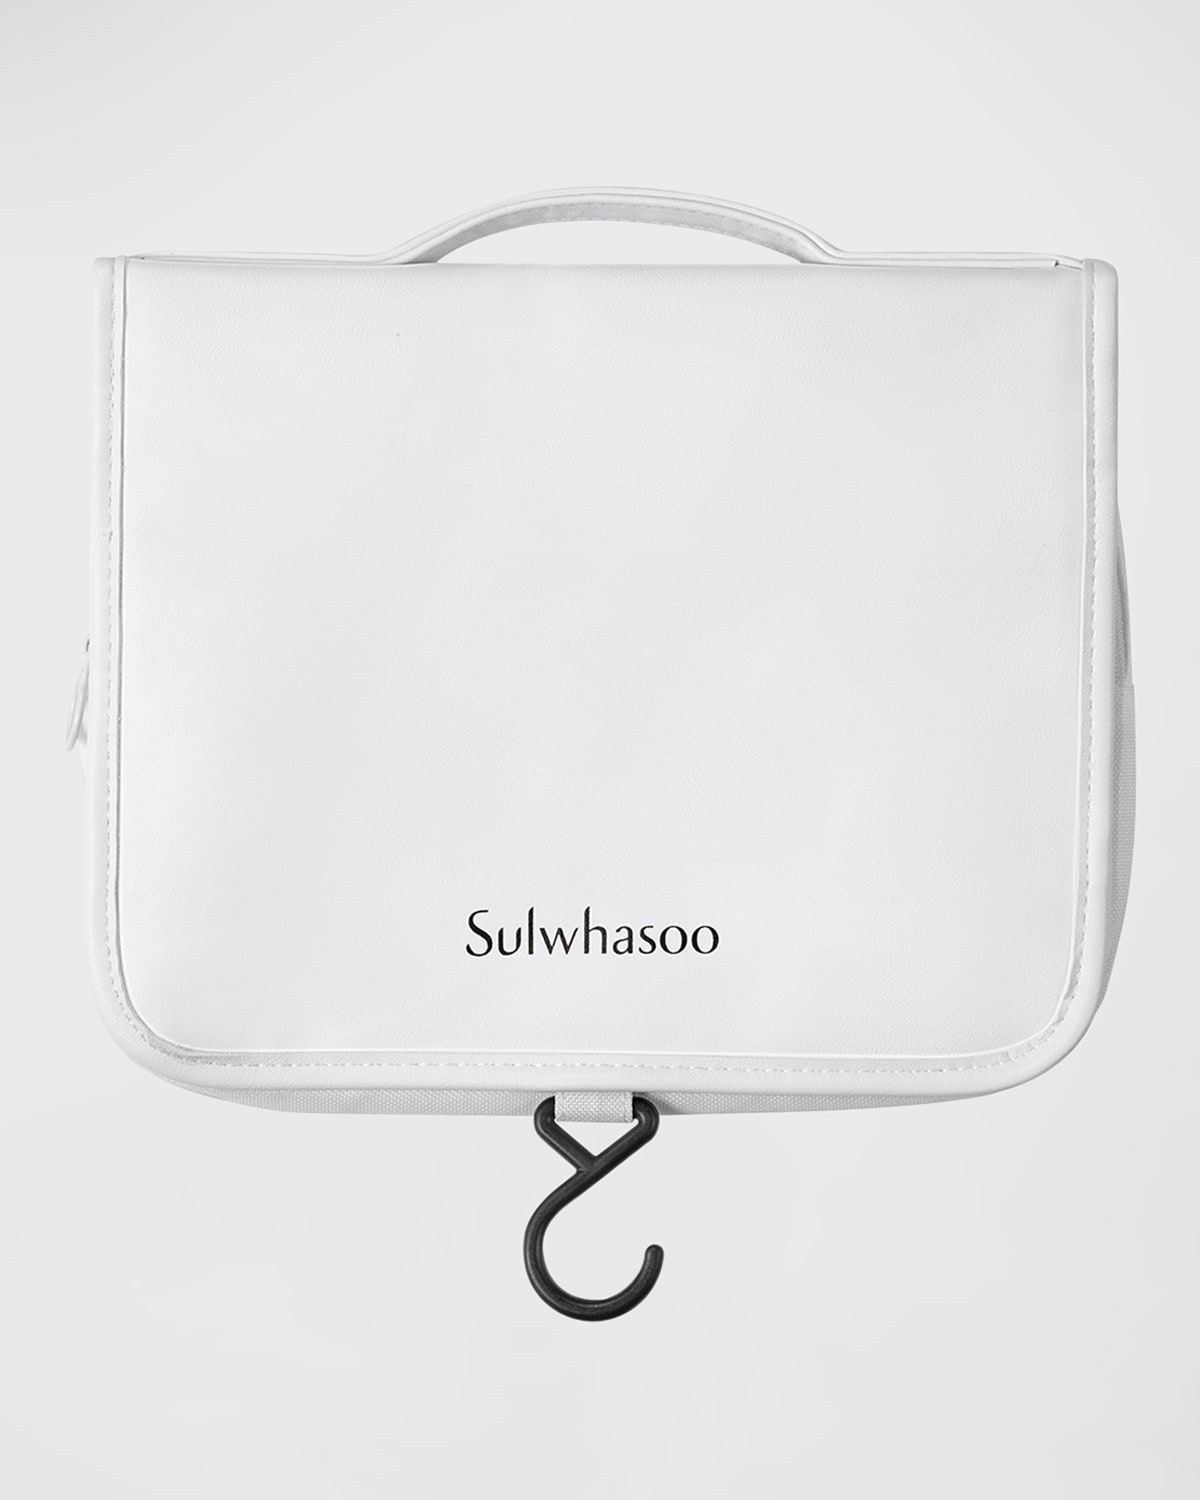 Luxury White Travel Pouch, Yours with any $250 Sulwhasoo Purchase